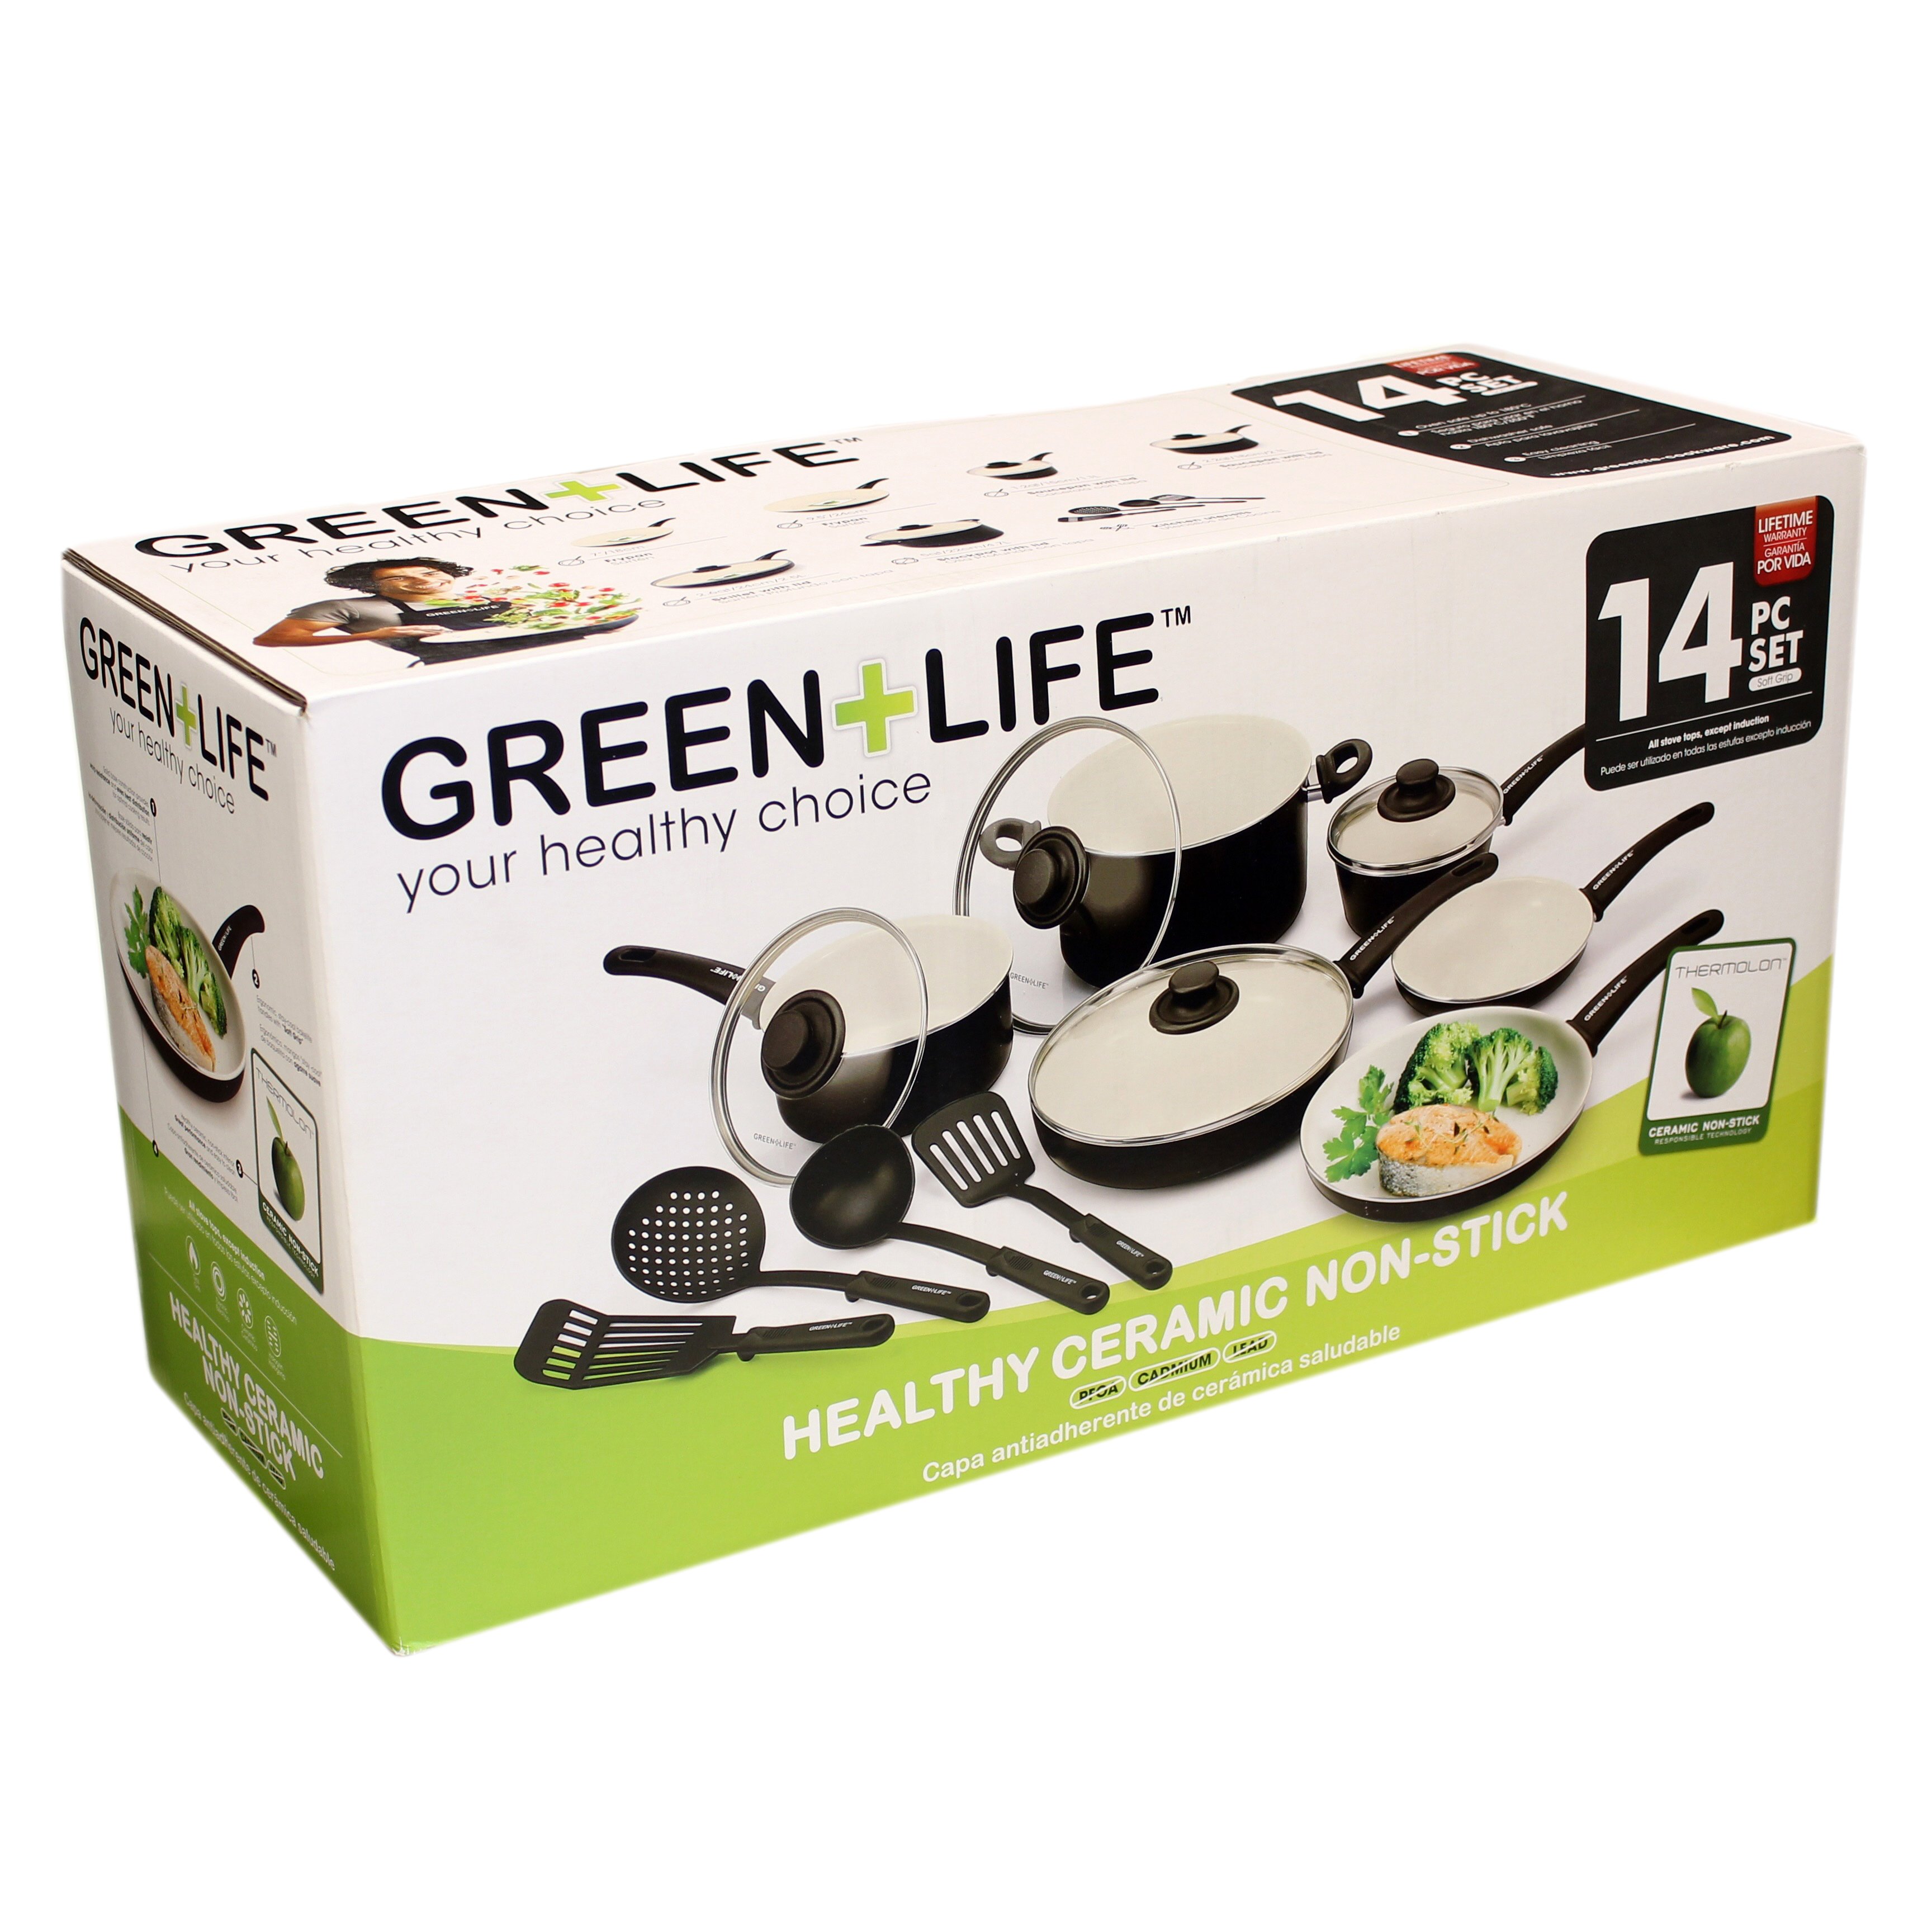 GreenLife Healthy Ceramic Non-Stick 14-Piece Soft Grip Cookware